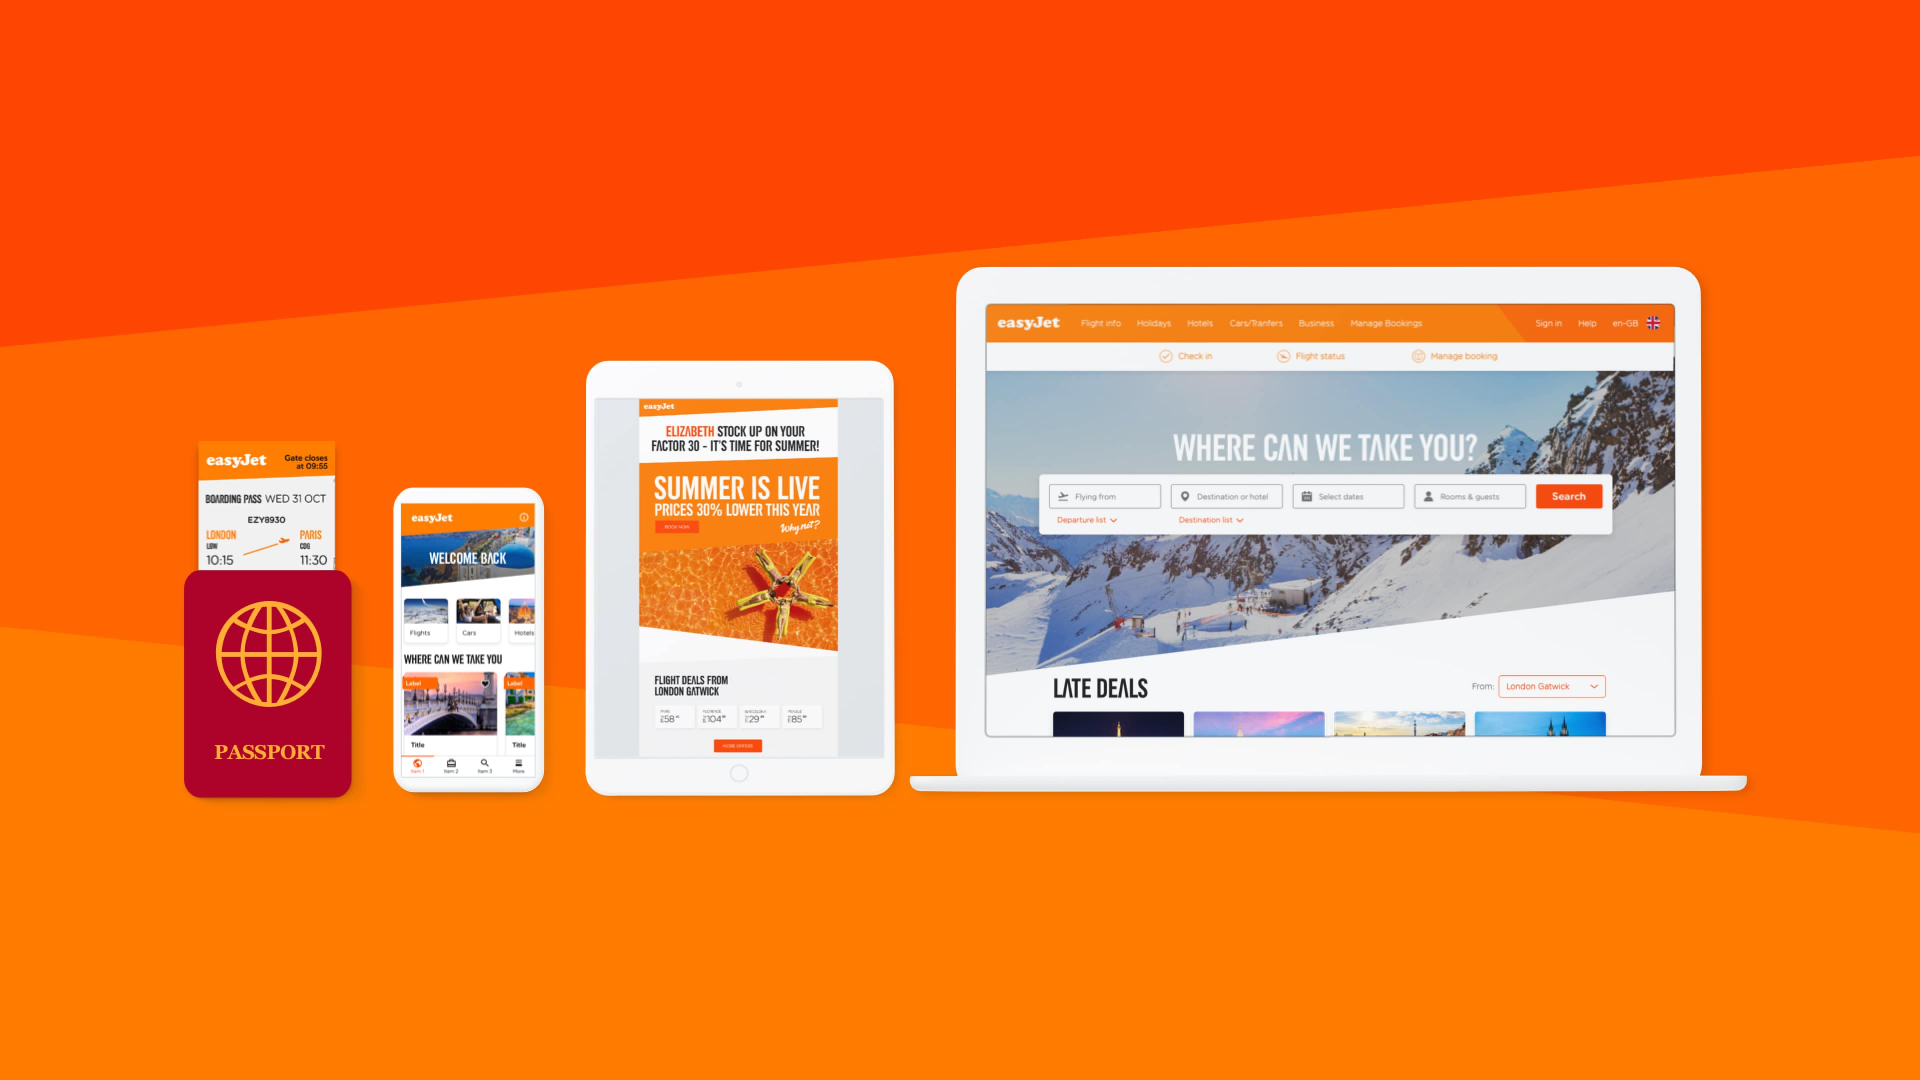 easyJet's World of Orange page showed on laptop, tablet, mobile and passport with boarding ticket